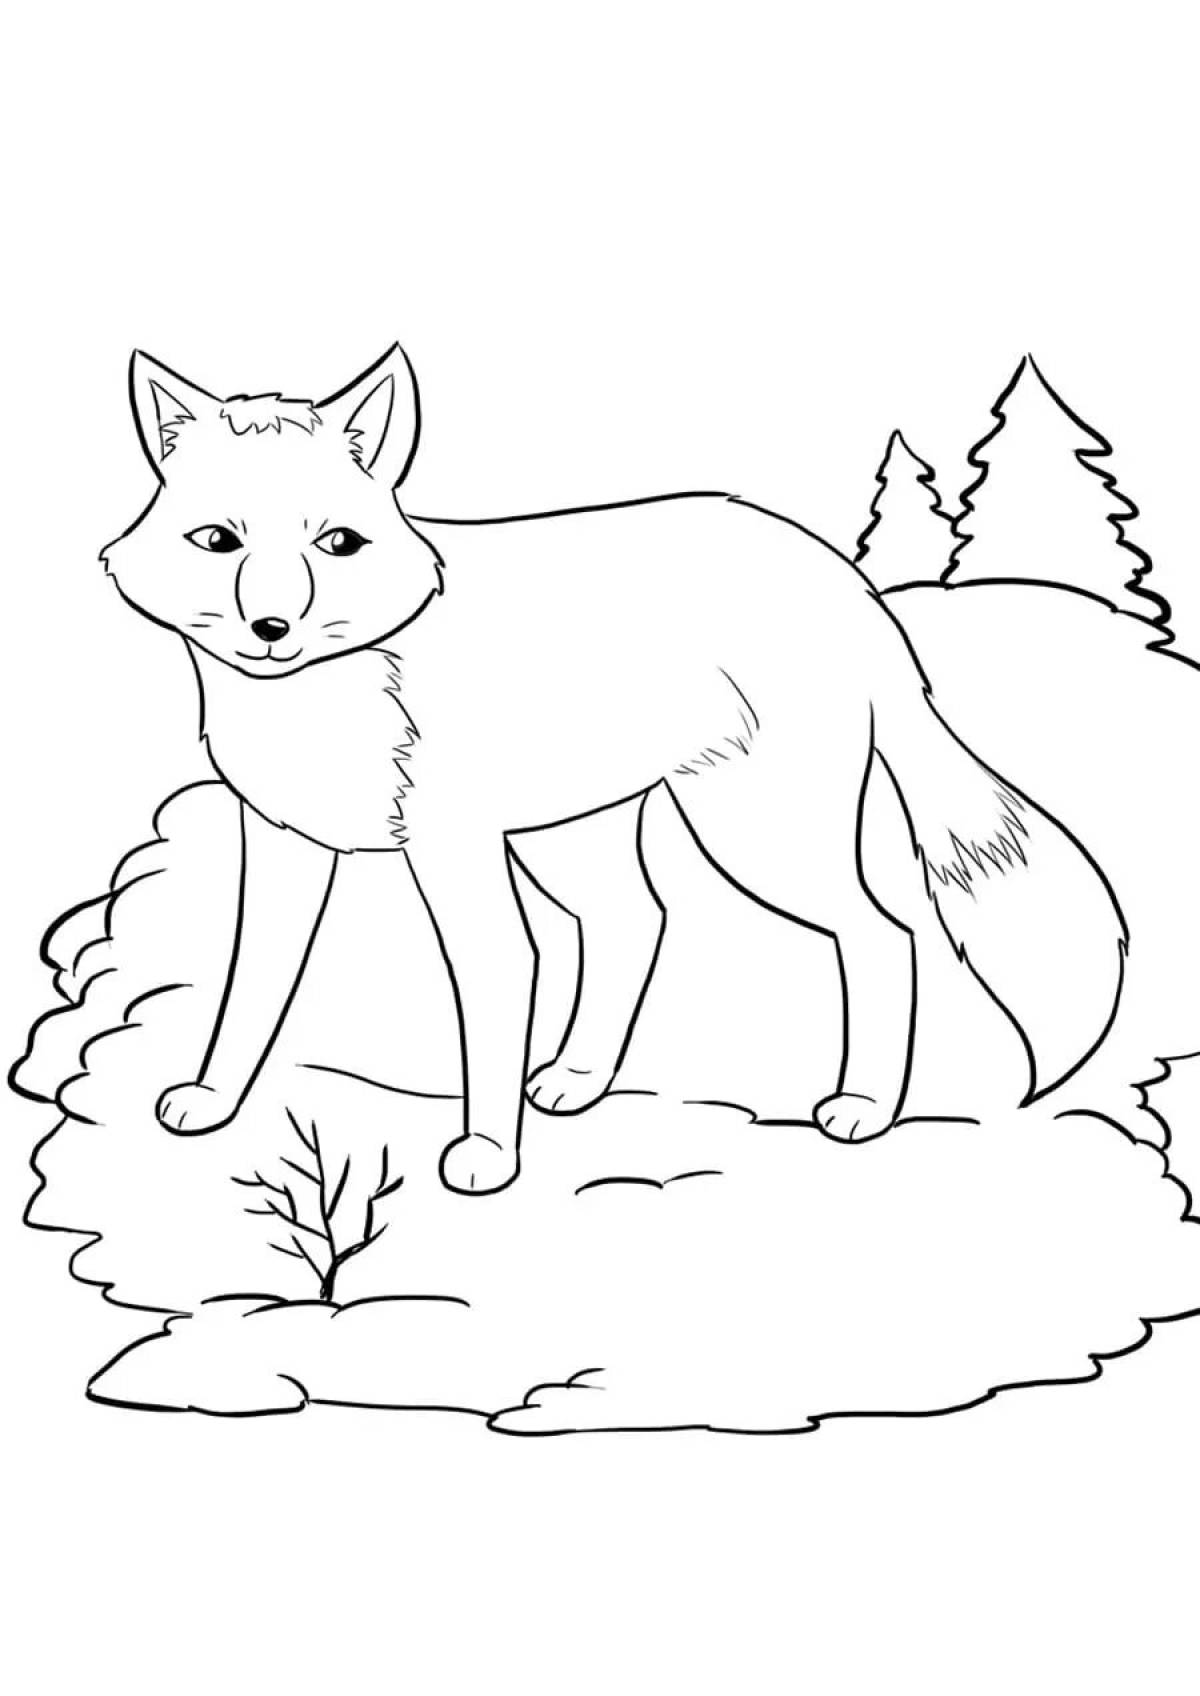 Fox in the forest #6